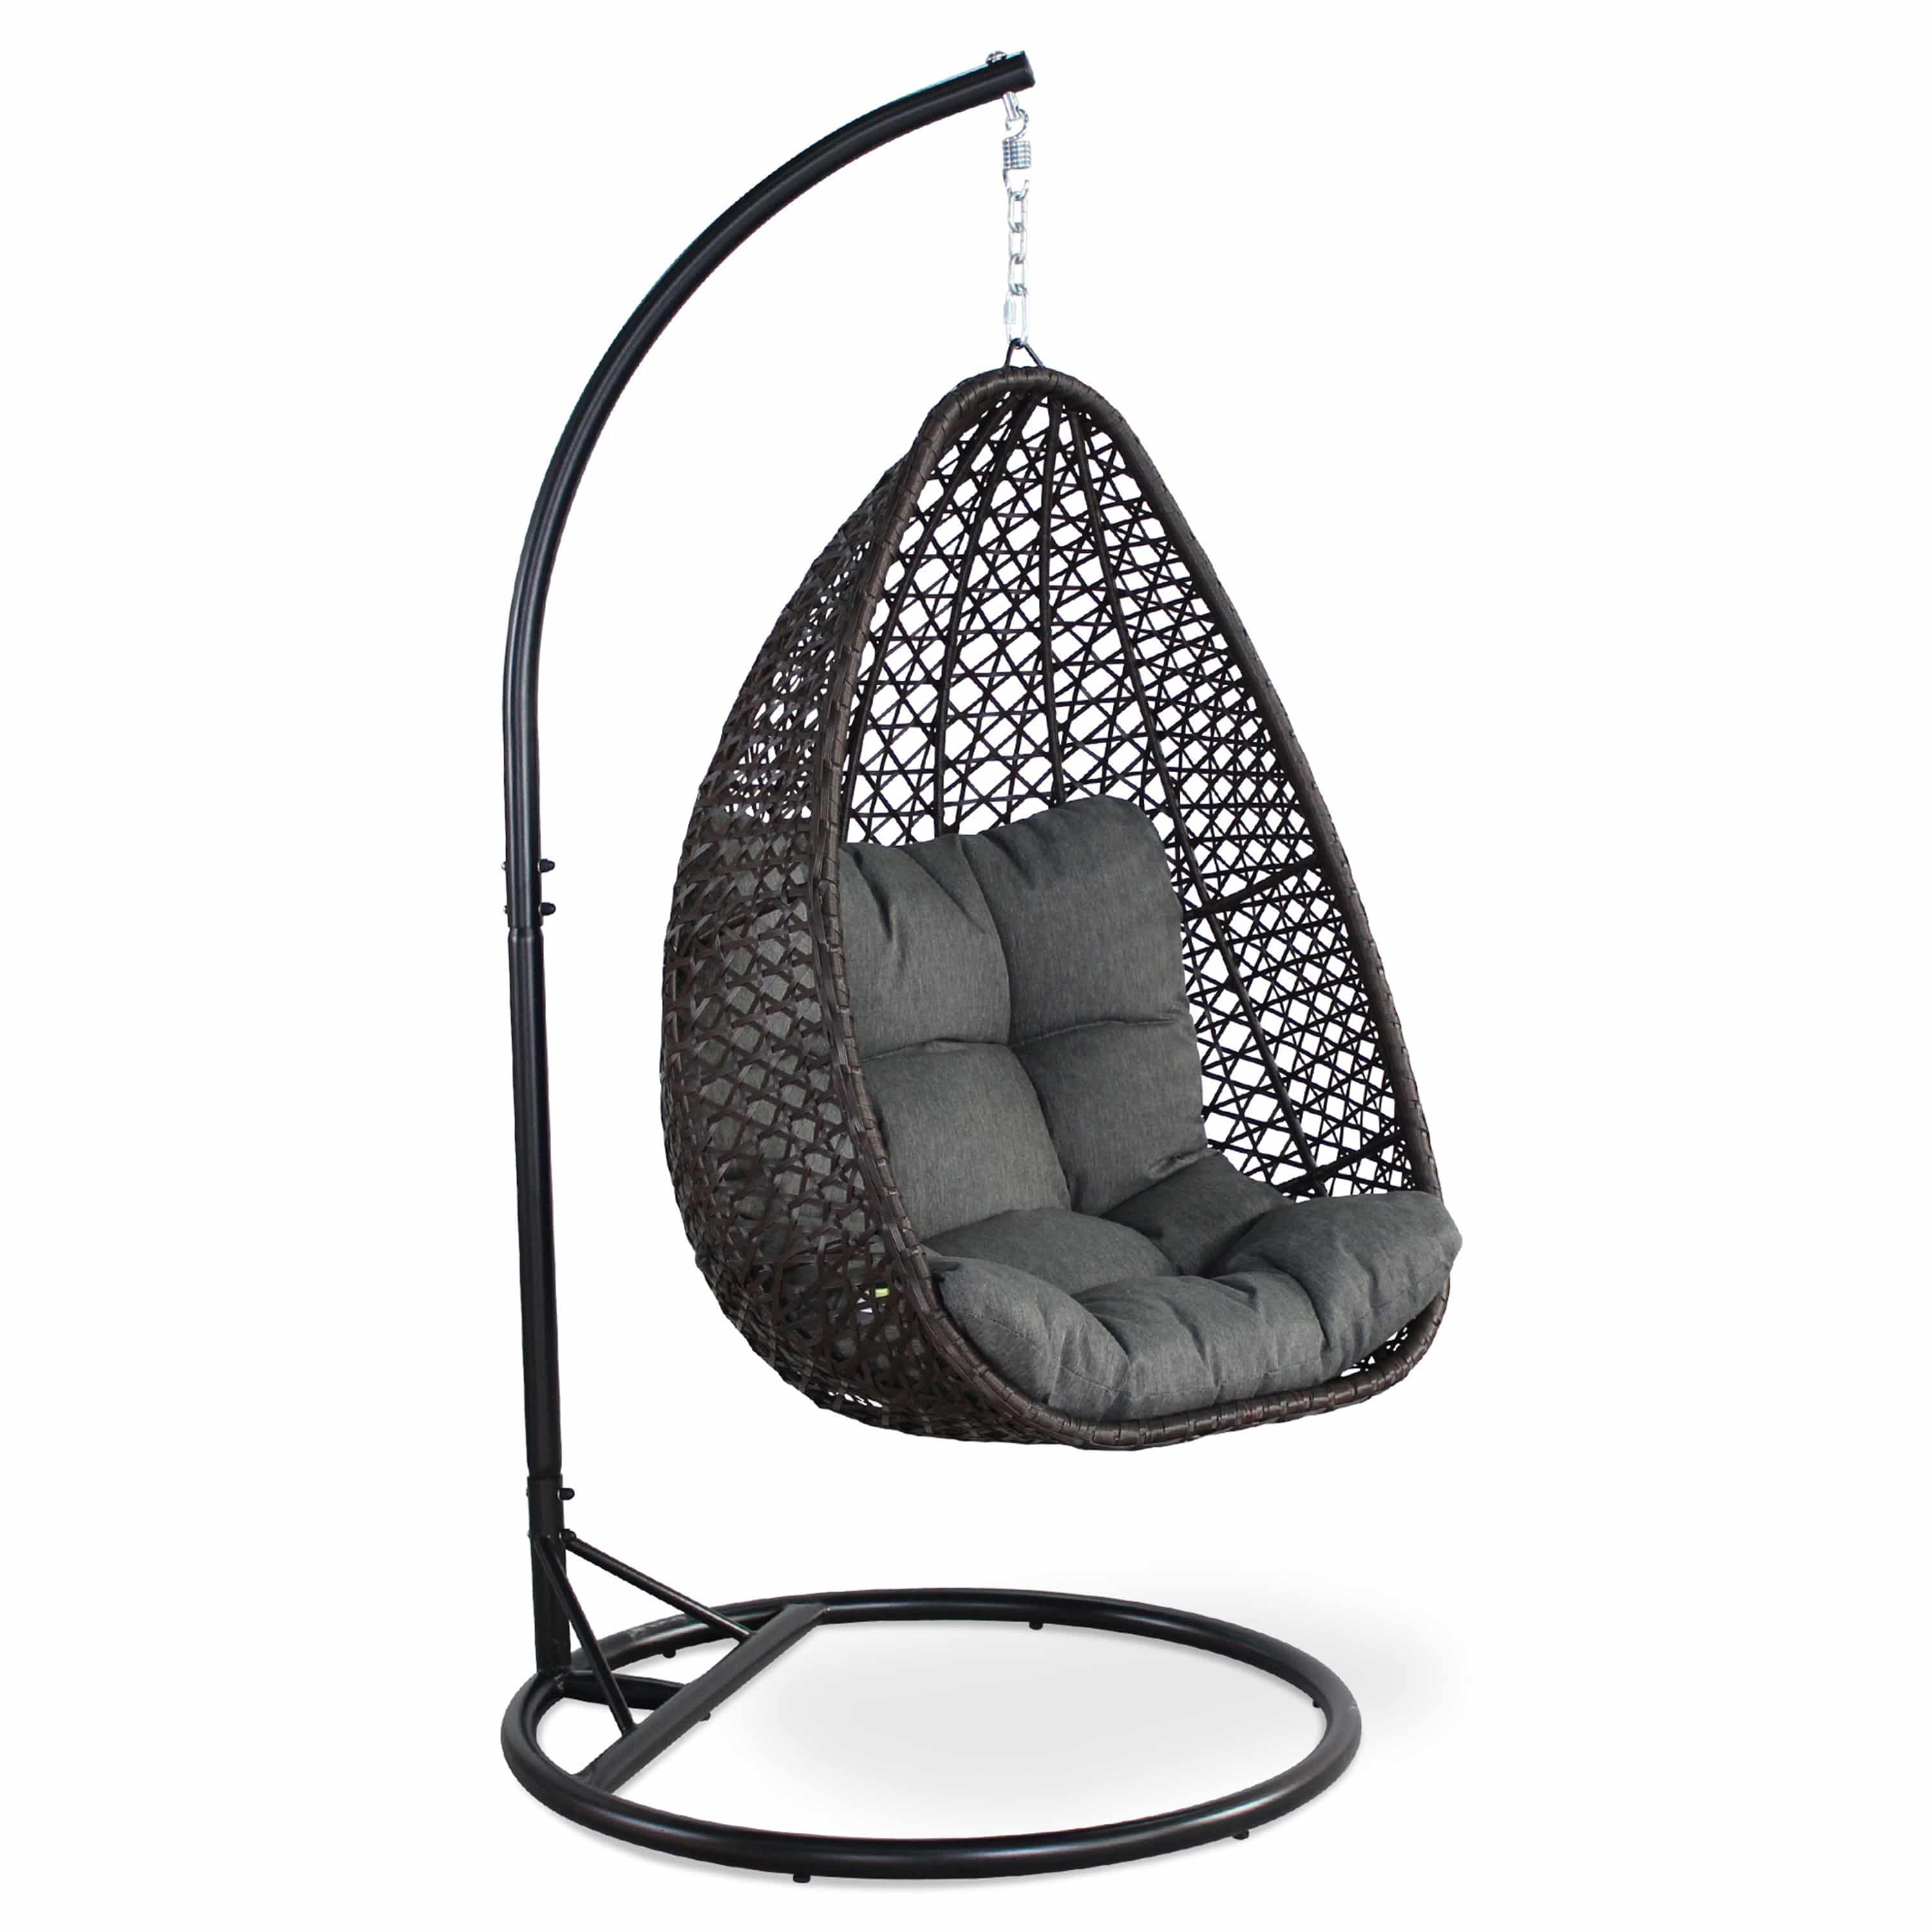 UOVO Egg shaped chair – Alice's Garden